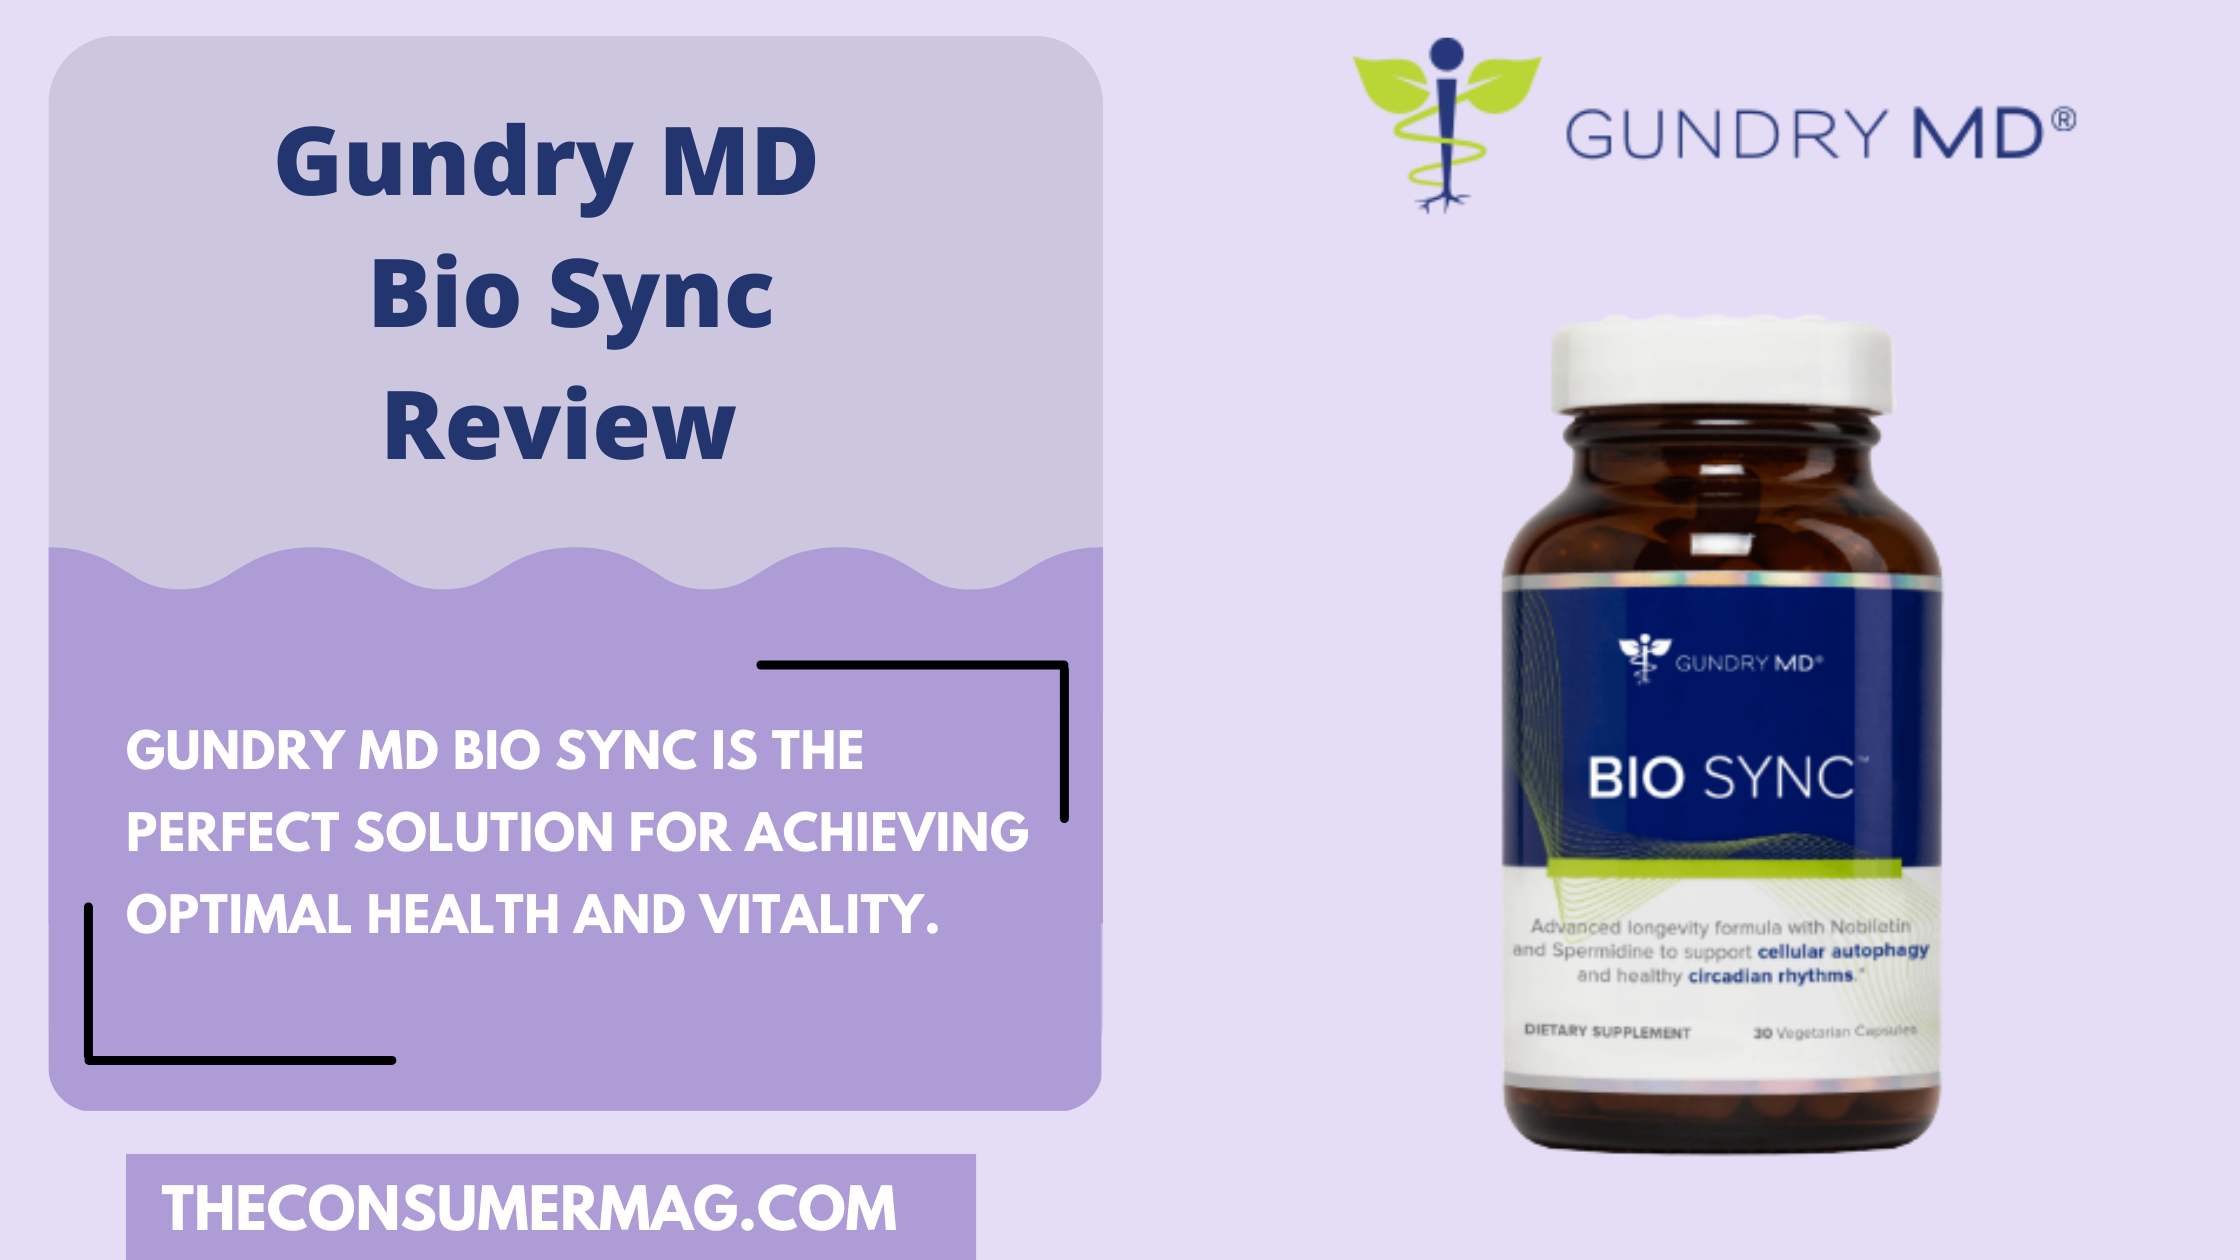 Gundry MD Bio Sync Featured Image